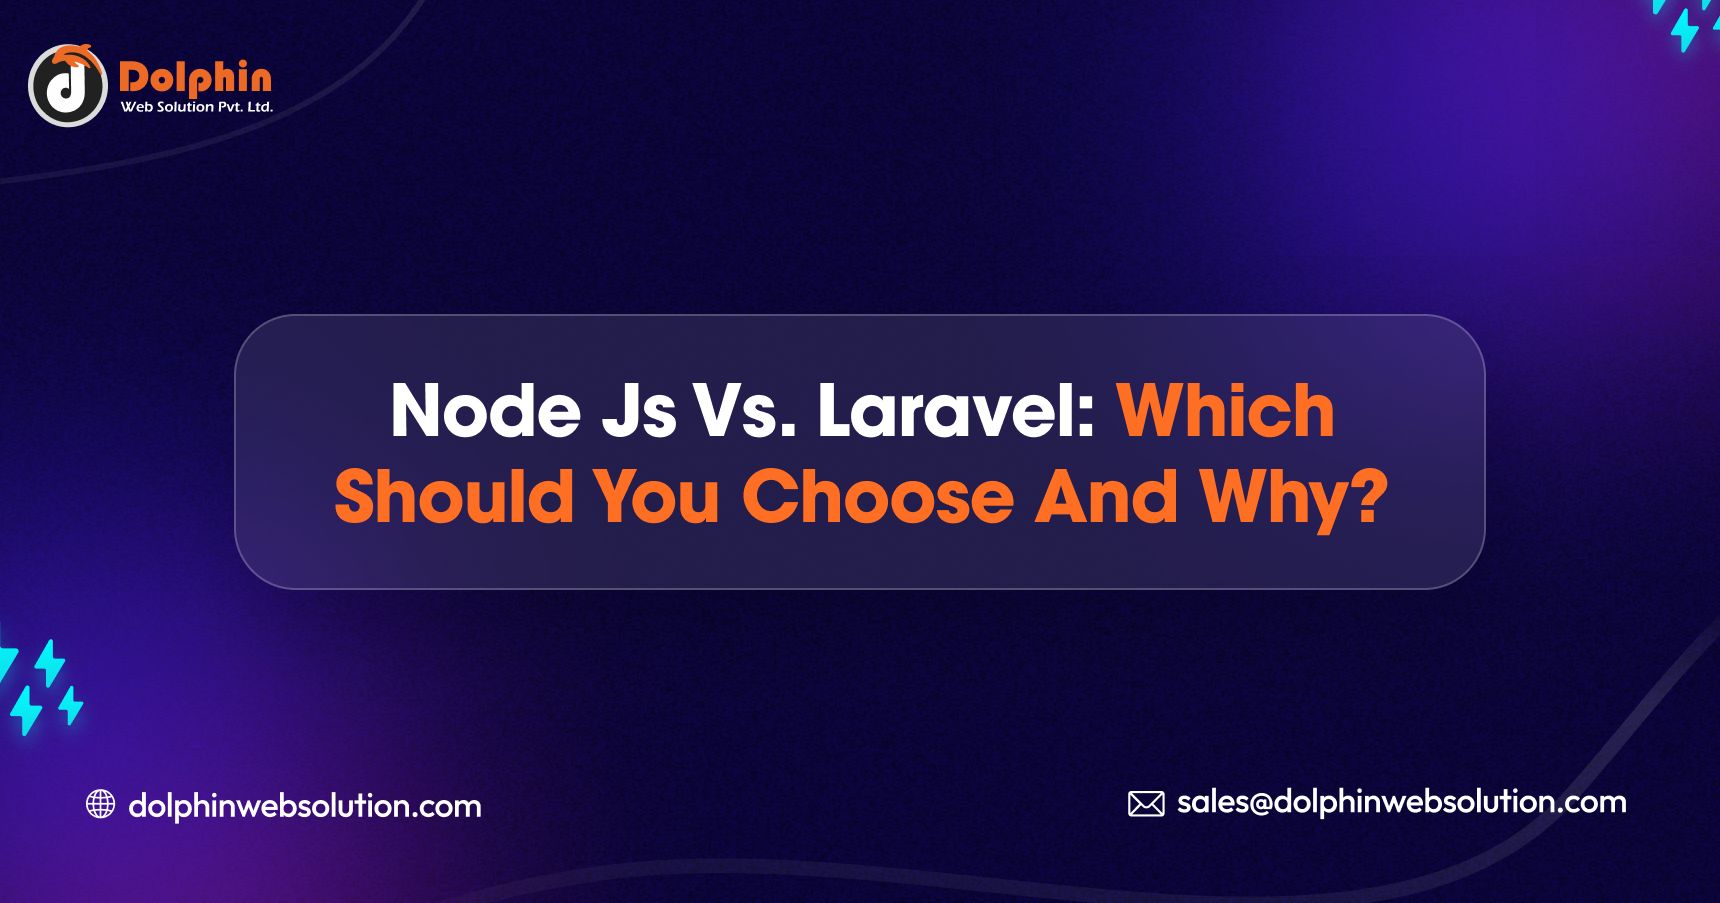 Node Js vs. Laravel: Which Should You Choose and Why?